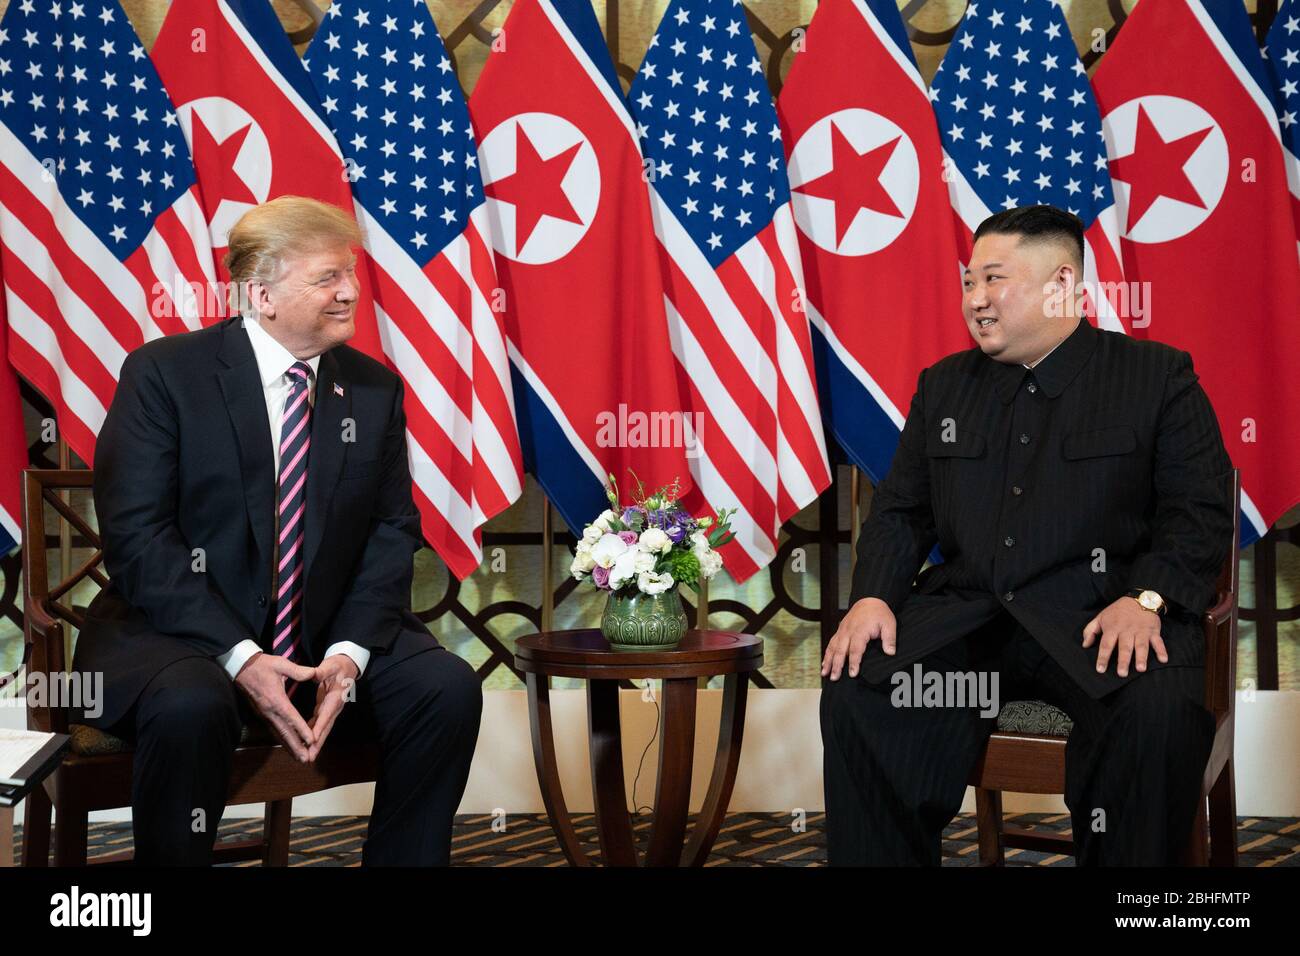 Hanoi, Vietnam. 27th Feb, 2019. President Donald J. Trump and Kim Jong Un, Chairman of the State Affairs Commission of the Democratic PeopleÕs Republic of Korea, talk Wednesday, Feb. 27, 2019, at the Sofitel Legend Metropole hotel in Hanoi, for their second summit. People: President Donald Trump, Kim Jong Un Credit: Storms Media Group/Alamy Live News Stock Photo